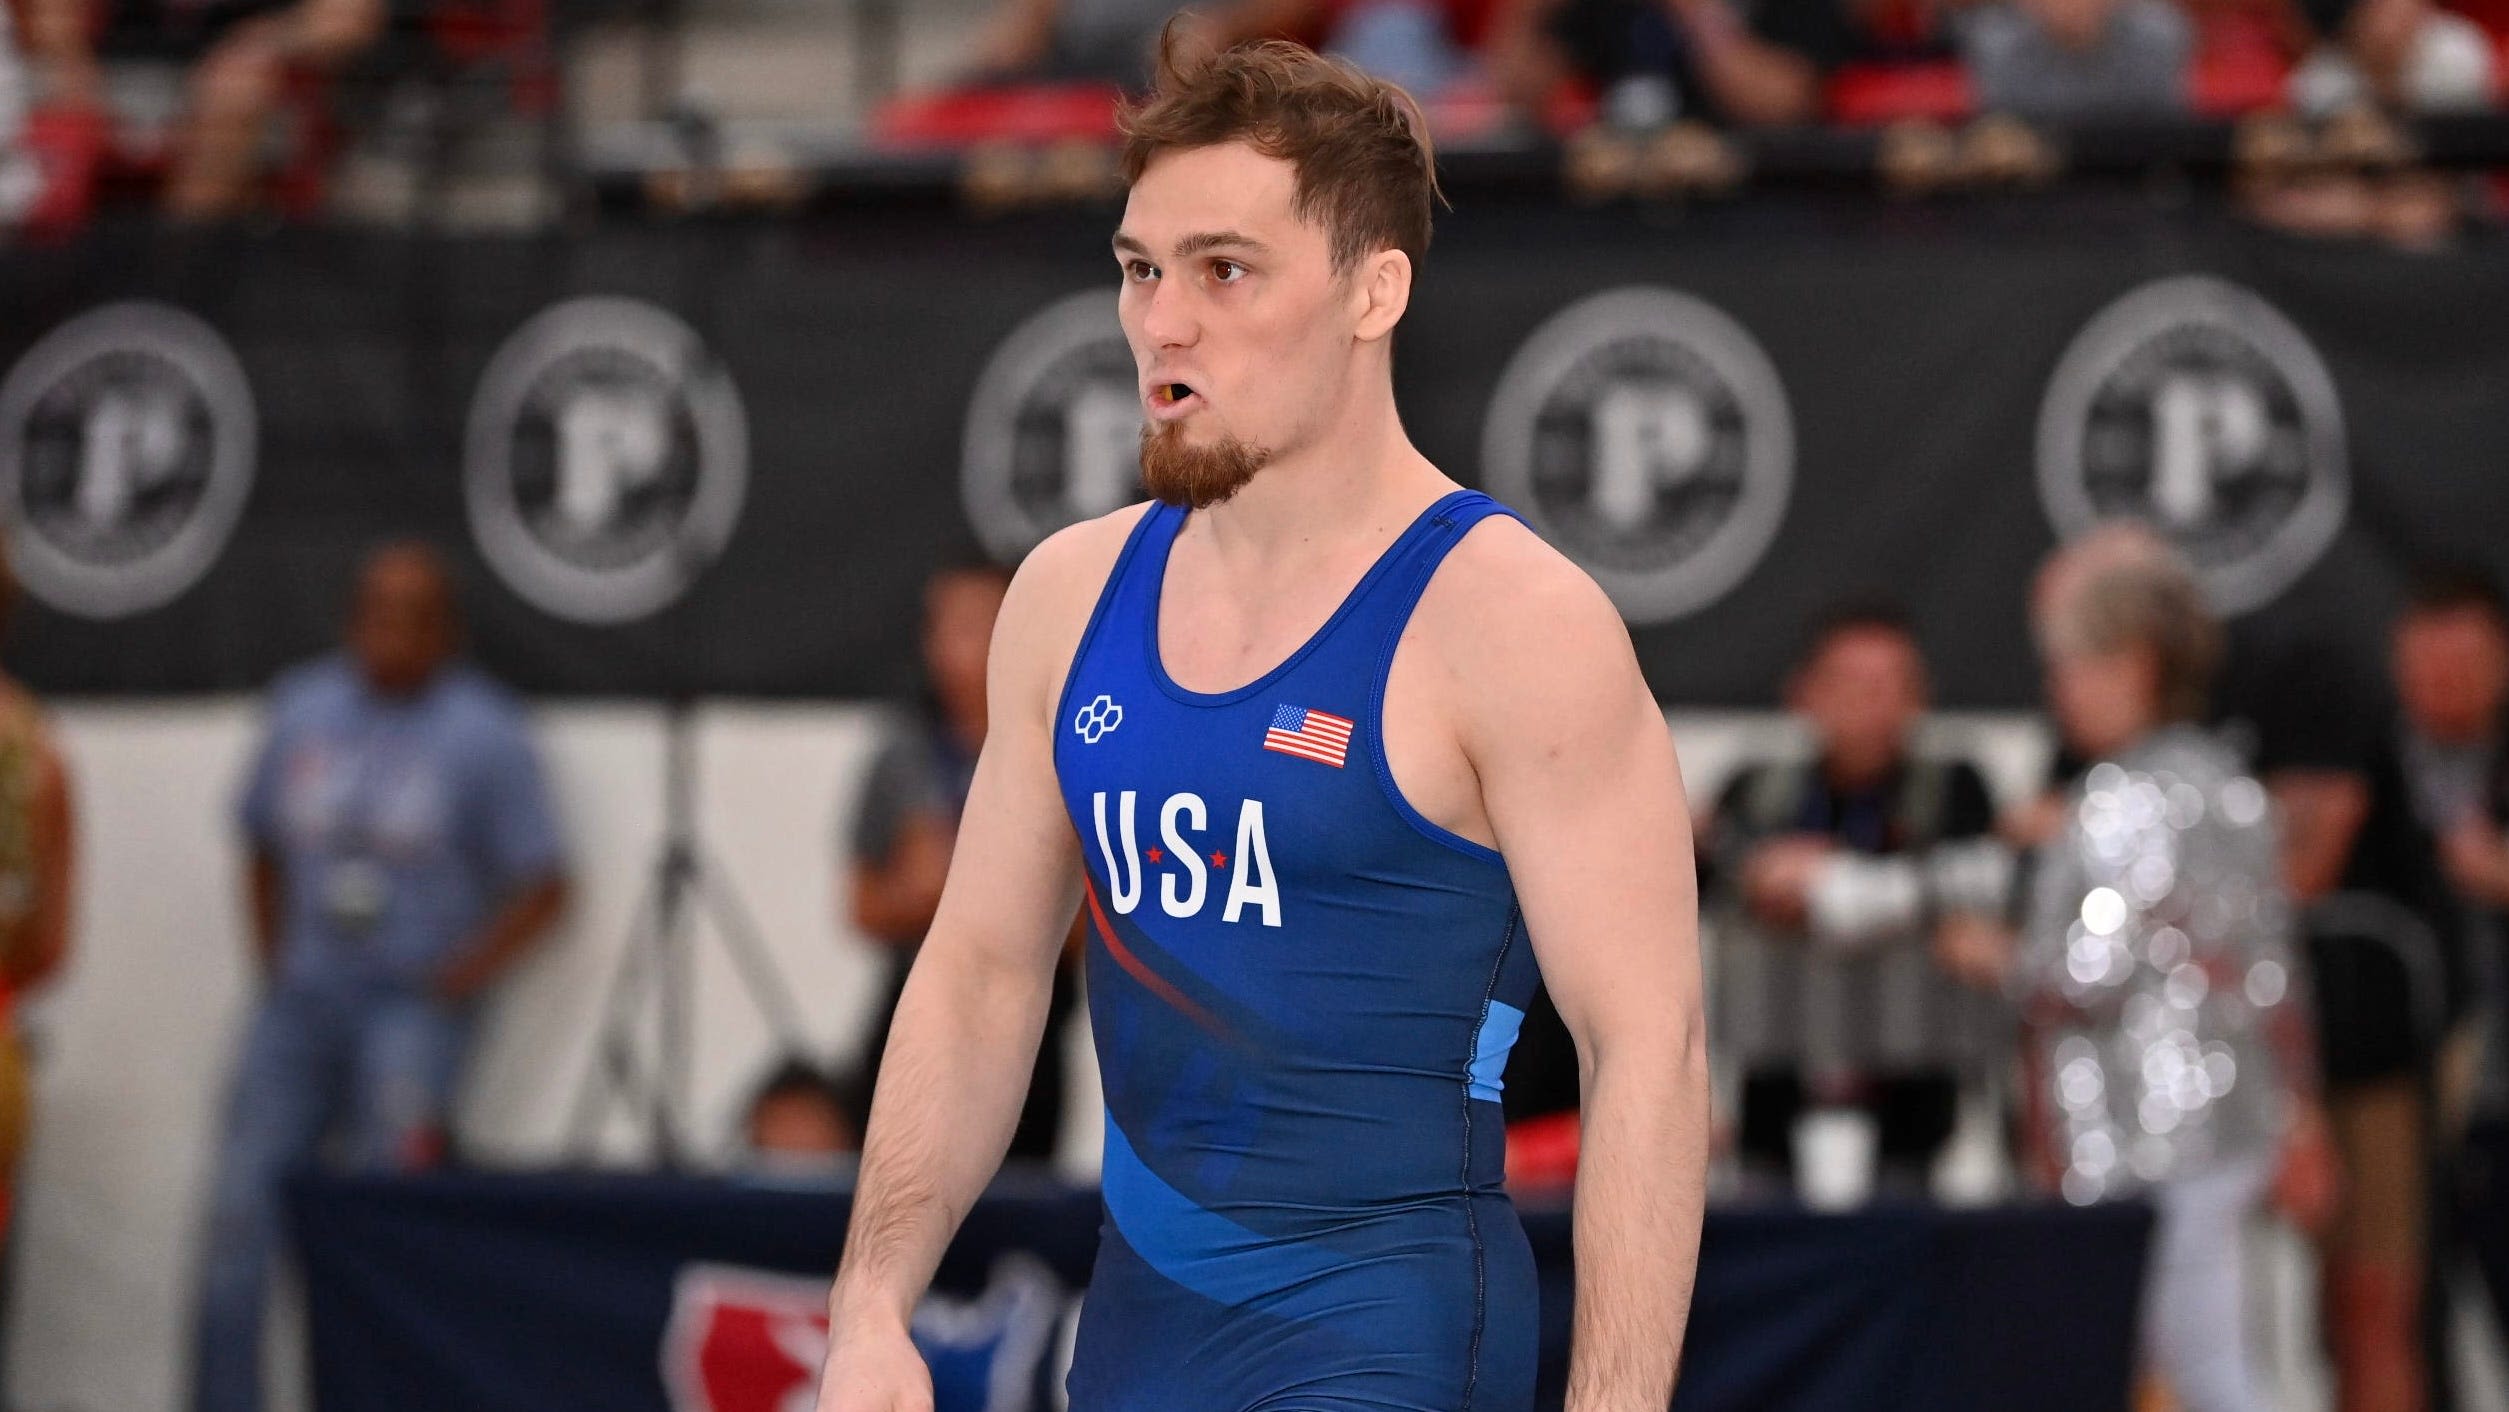 How to watch Spencer Lee, former and current Iowa Hawkeyes at U.S. wrestling Olympic Trials